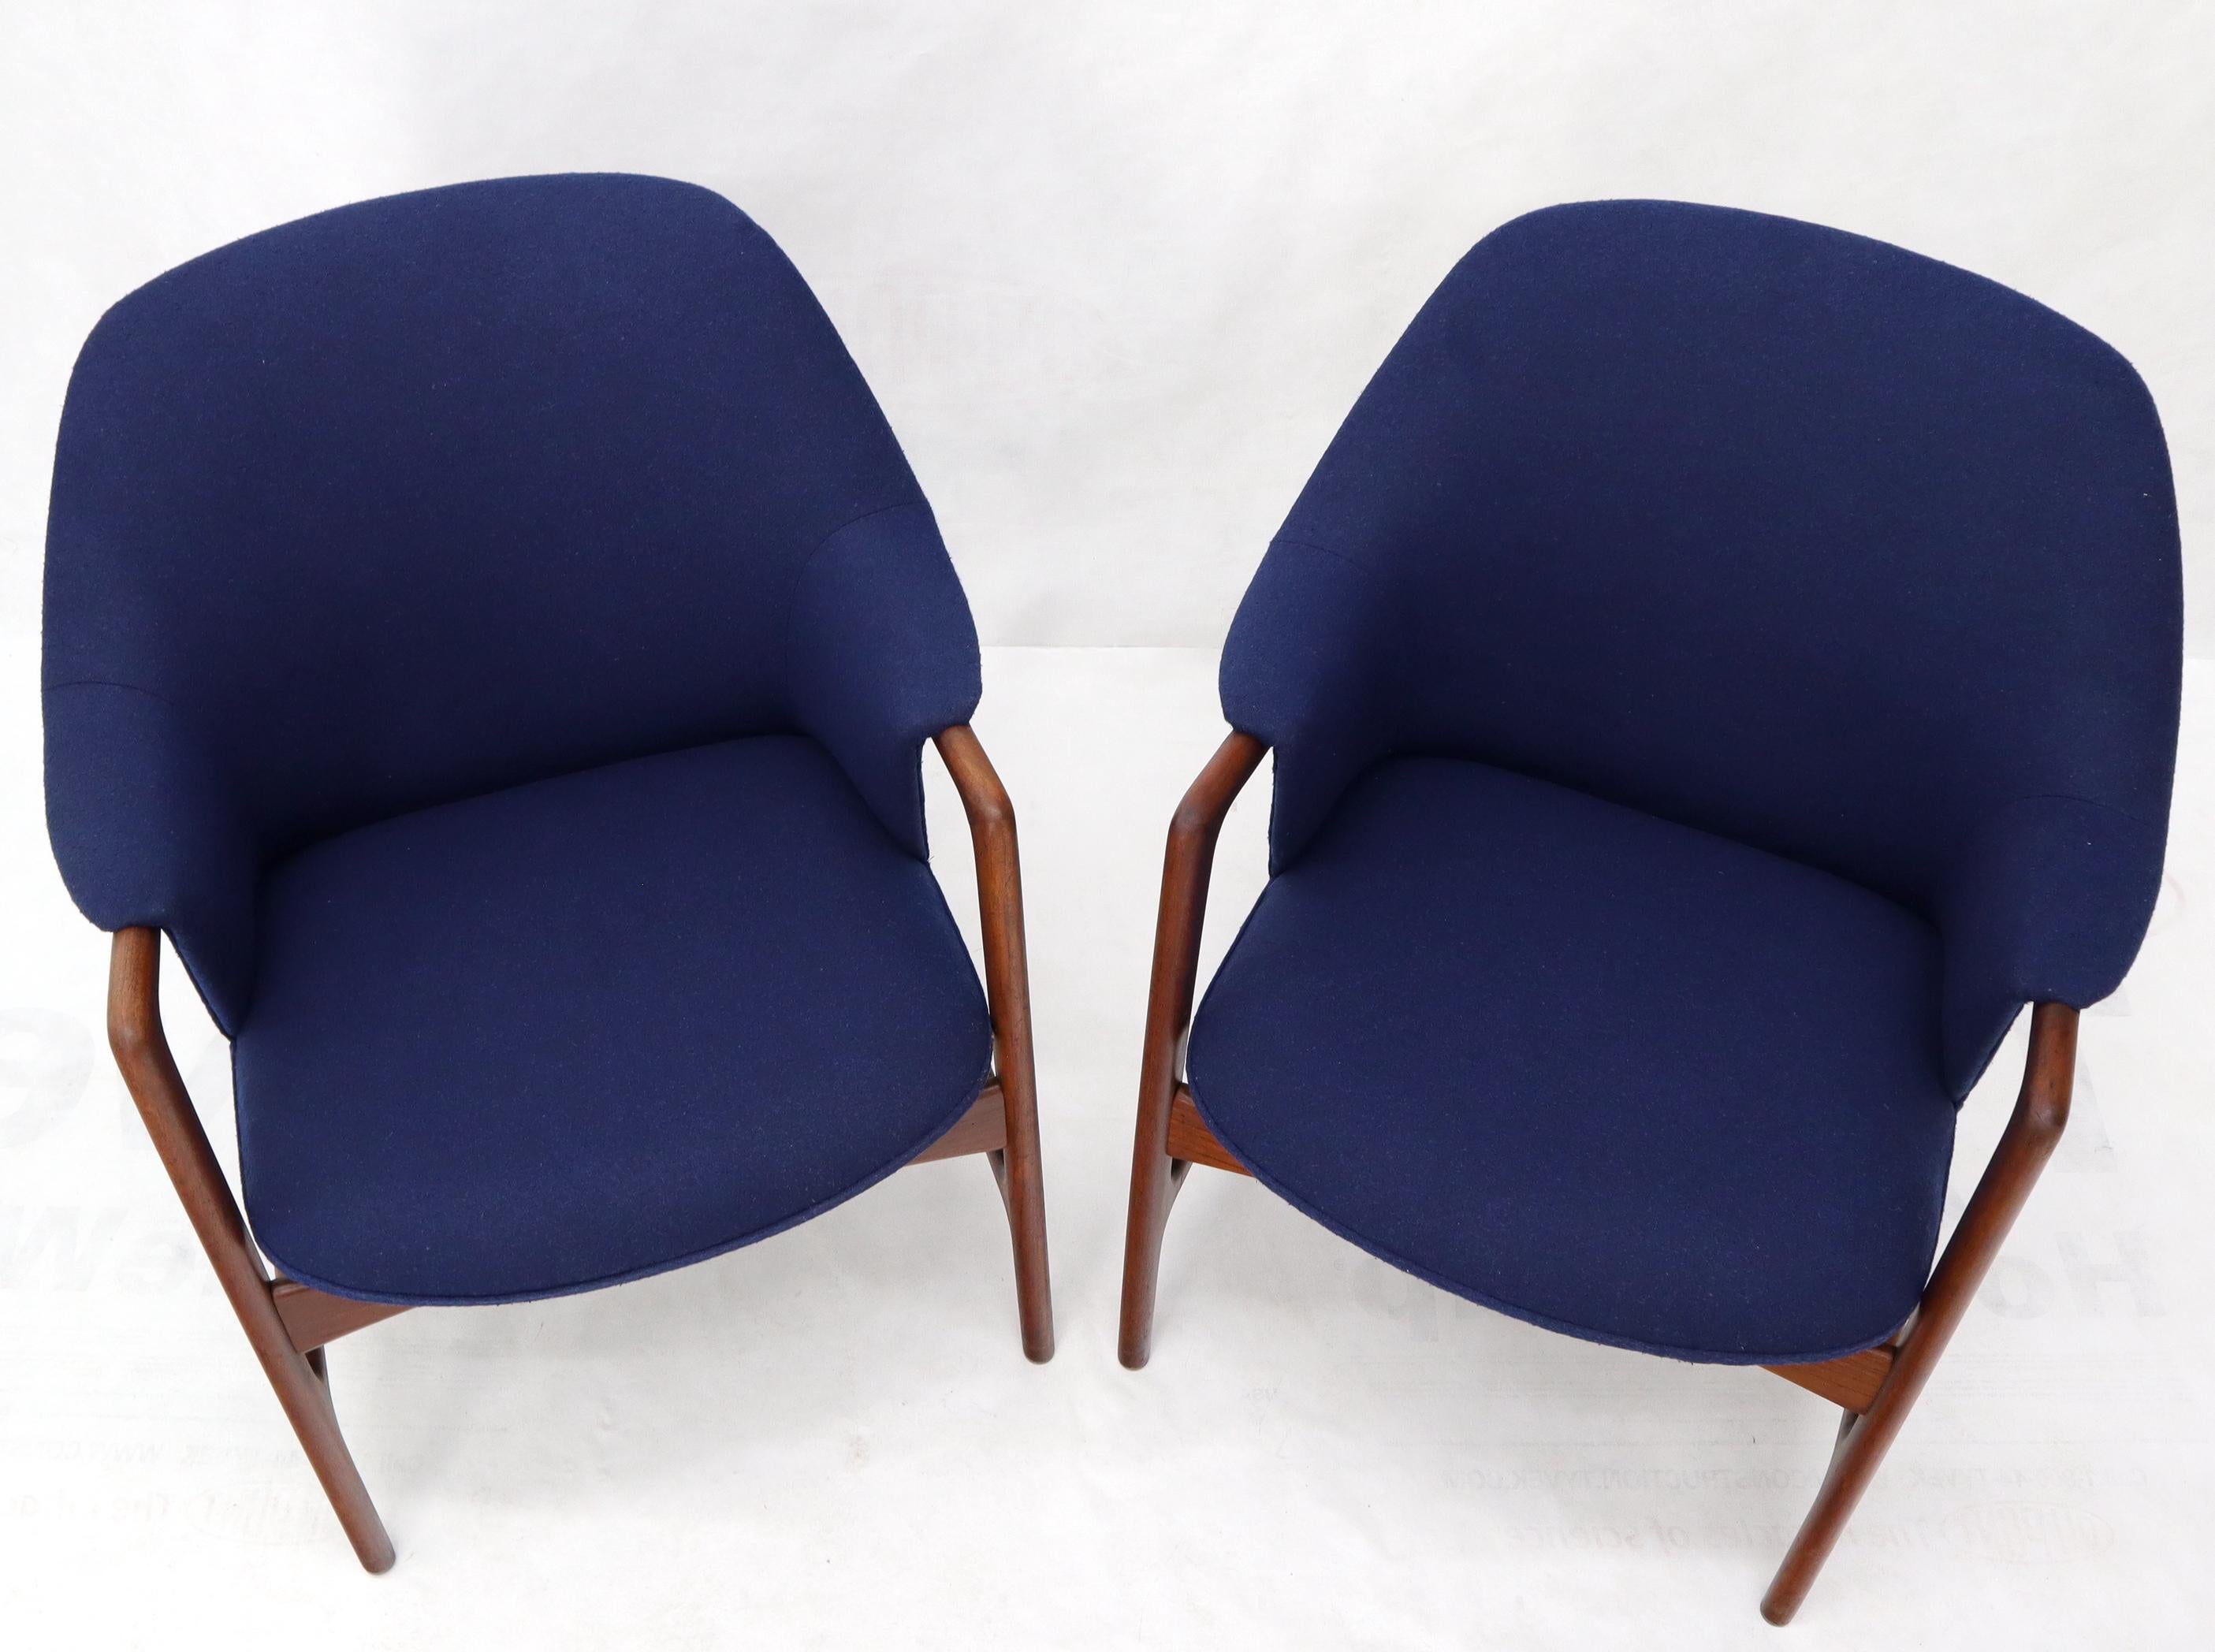 New Blue Wool Upholstery Teak Frames Danish Mid-Century Modern Lounge Chairs For Sale 1